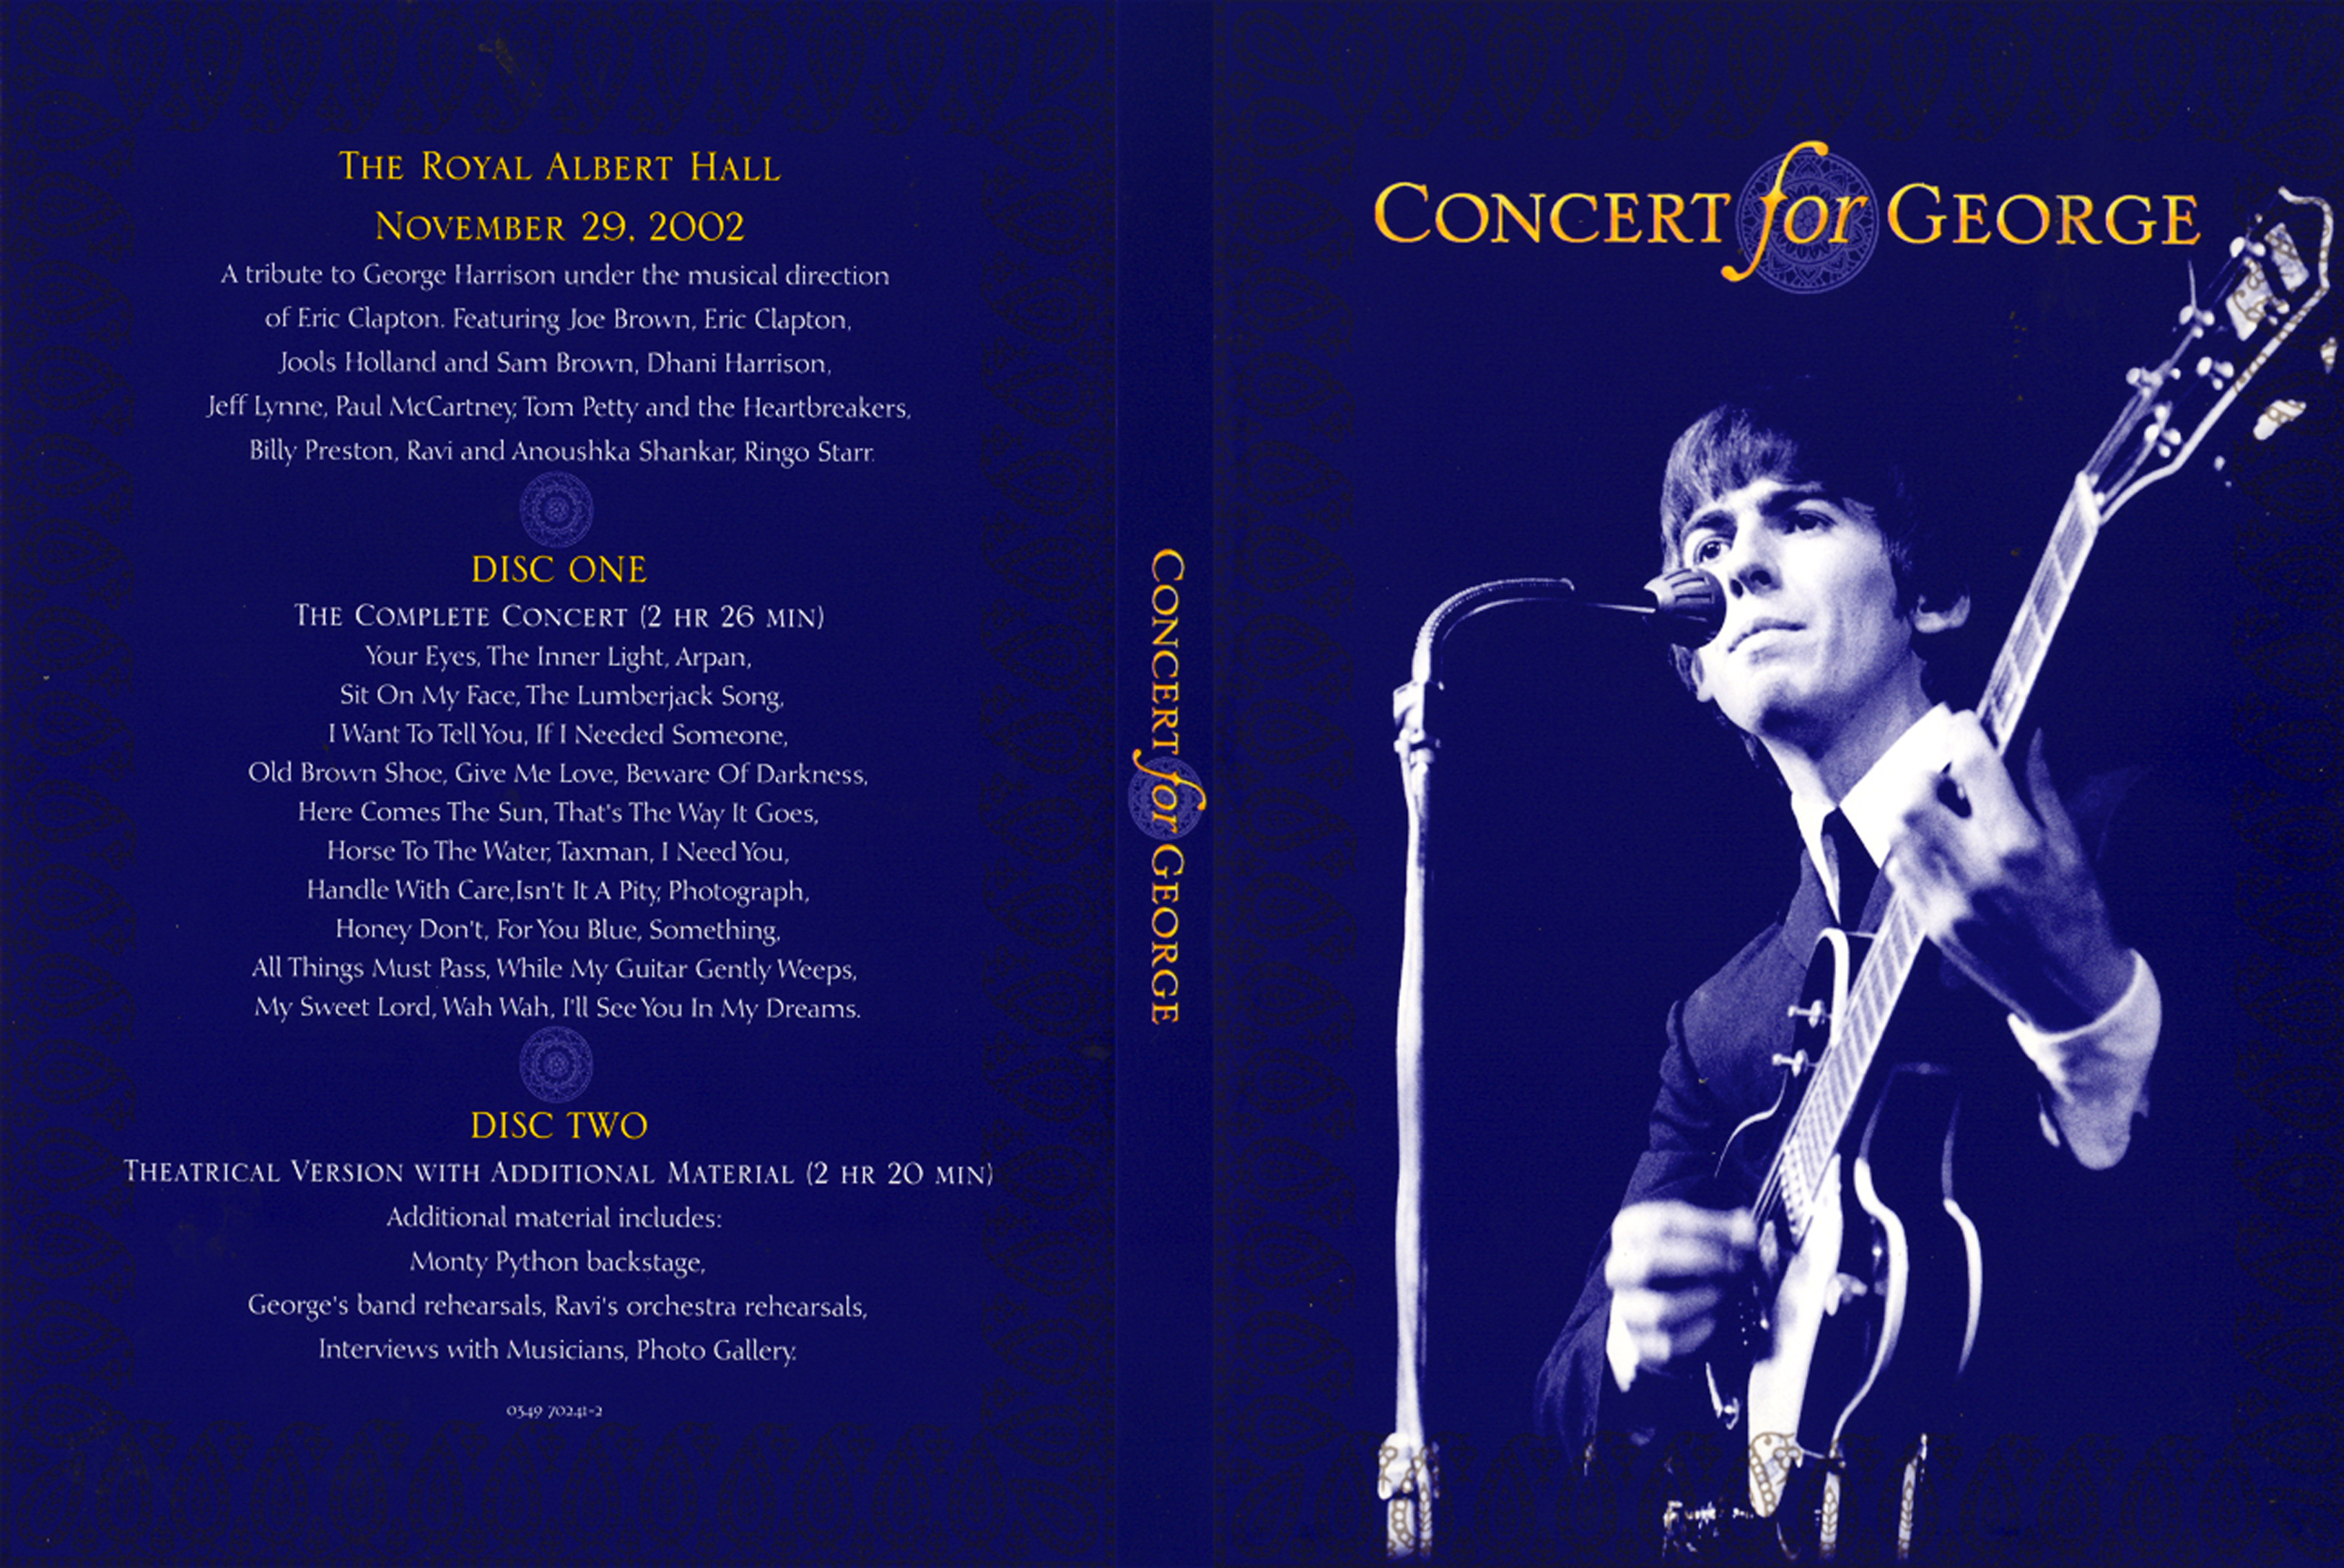 Jaquette DVD Concert for George